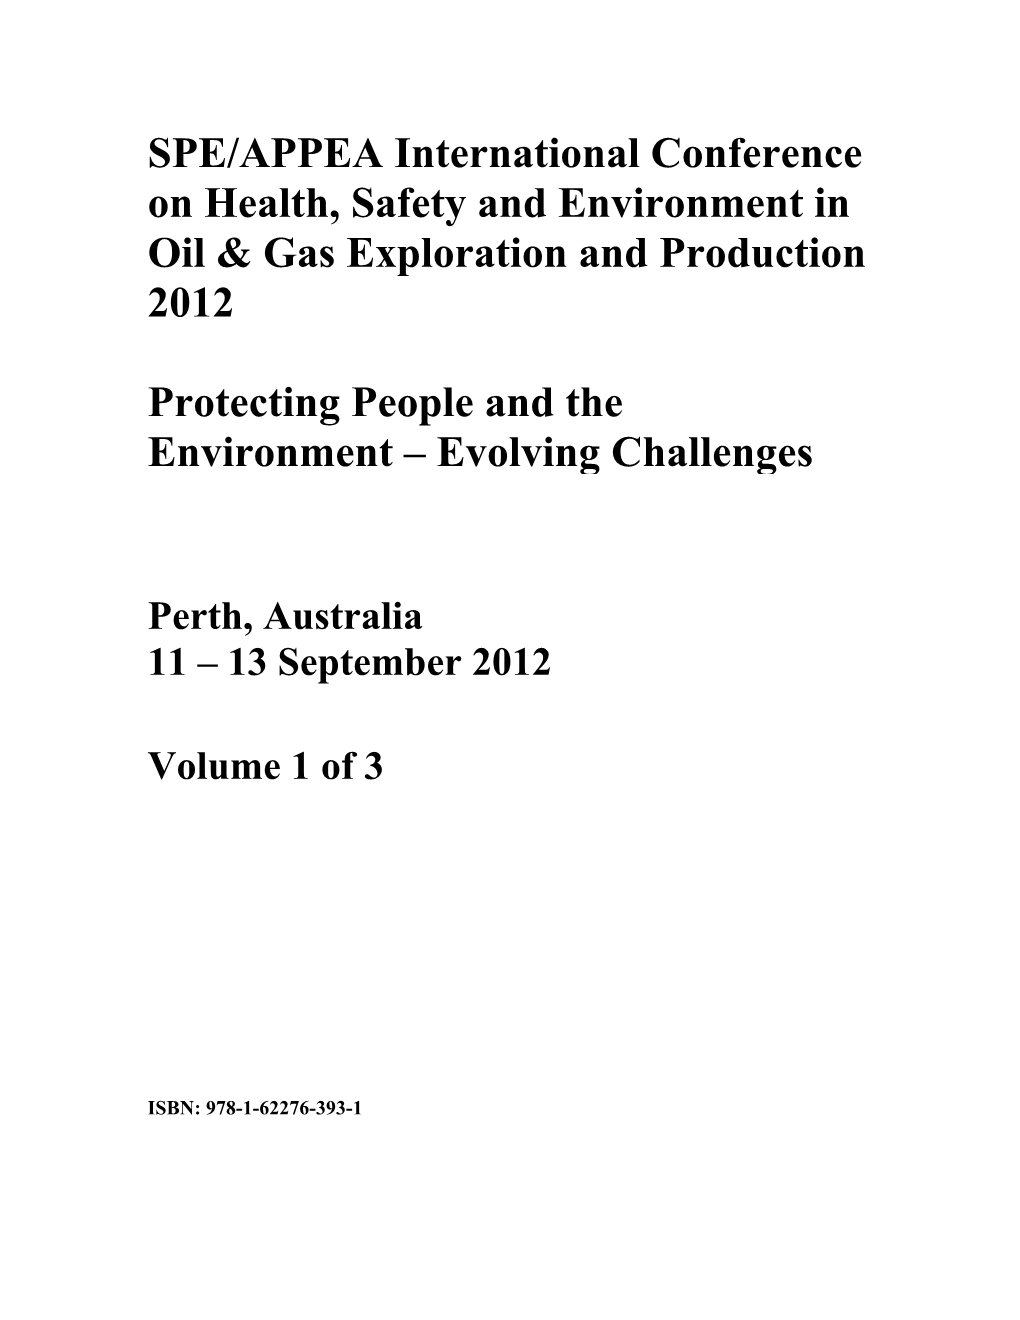 SPE/APPEA International Conference on Health, Safety and Environment in Oil & Gas Exploration and Production 2012